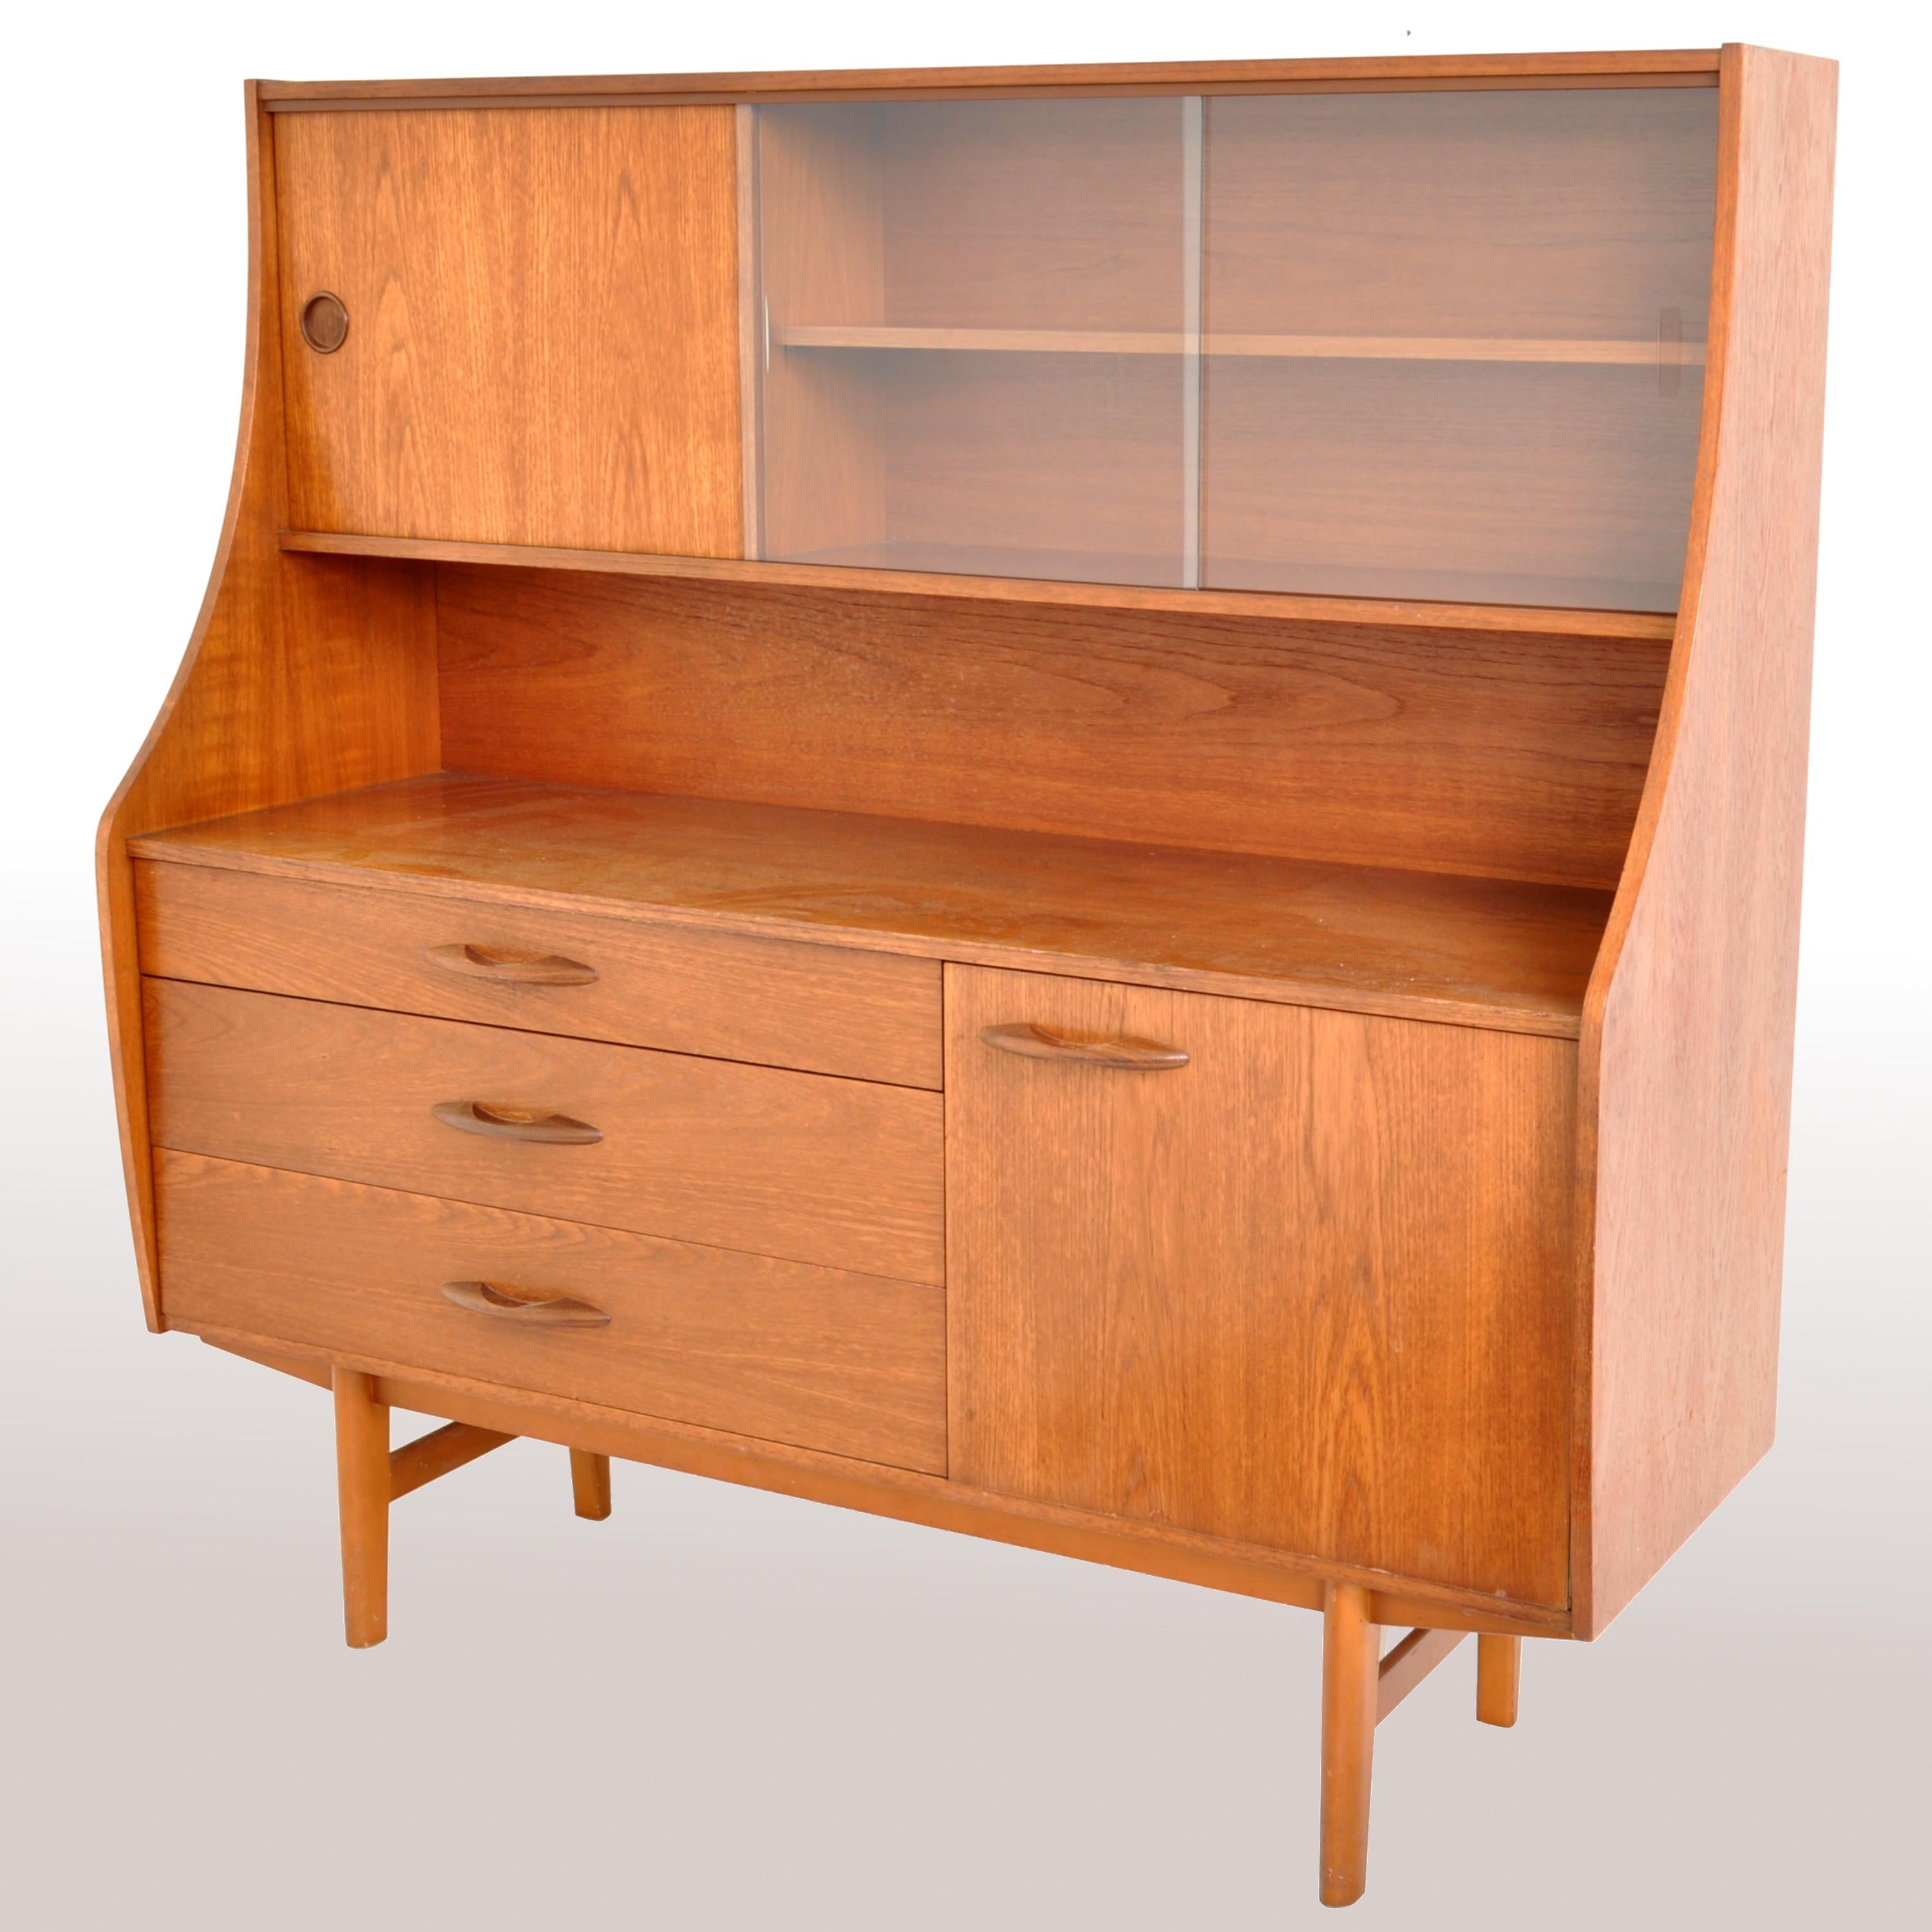 An original 1960s teak credenza having a sliding cabinet door to the left and twin sliding glass doors enclosing a single shelf to the right. Below is a recessed cavity above a bank of three graduated drawers to the left and a hinged cabinet door